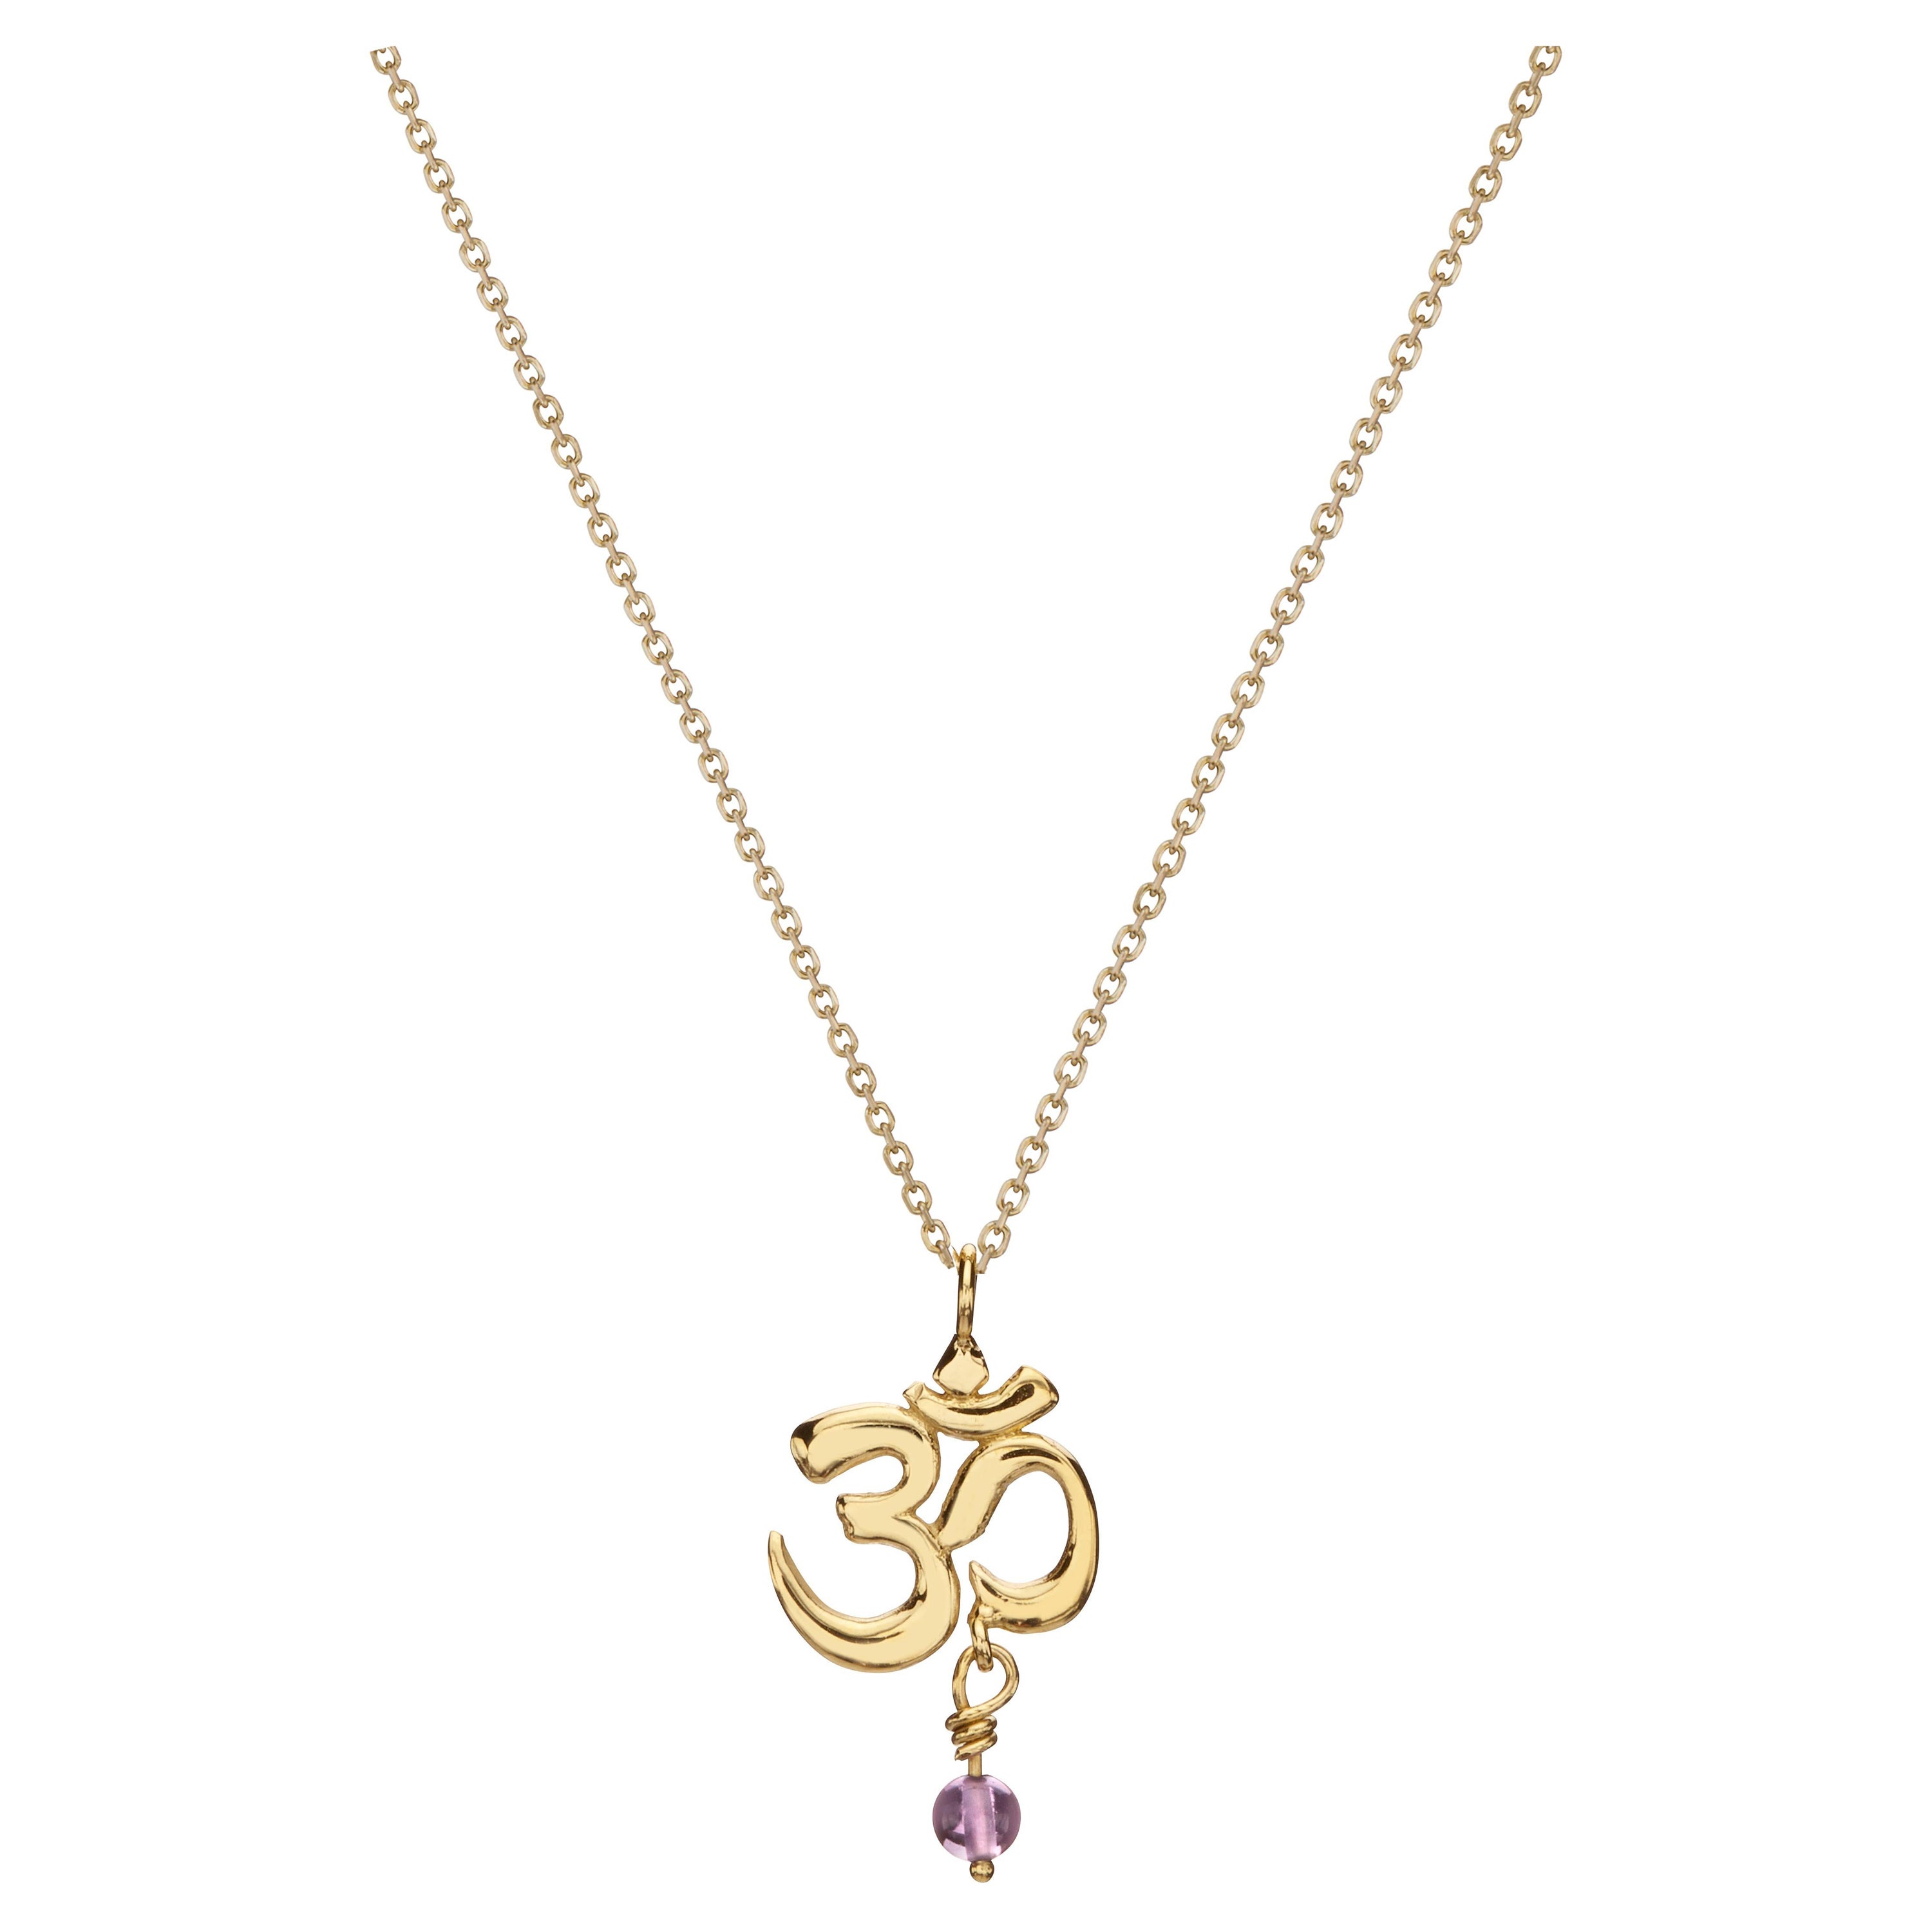 Handcrafted Pendant Necklace with the Om Symbol and Amethyst in 14Kt Gold For Sale